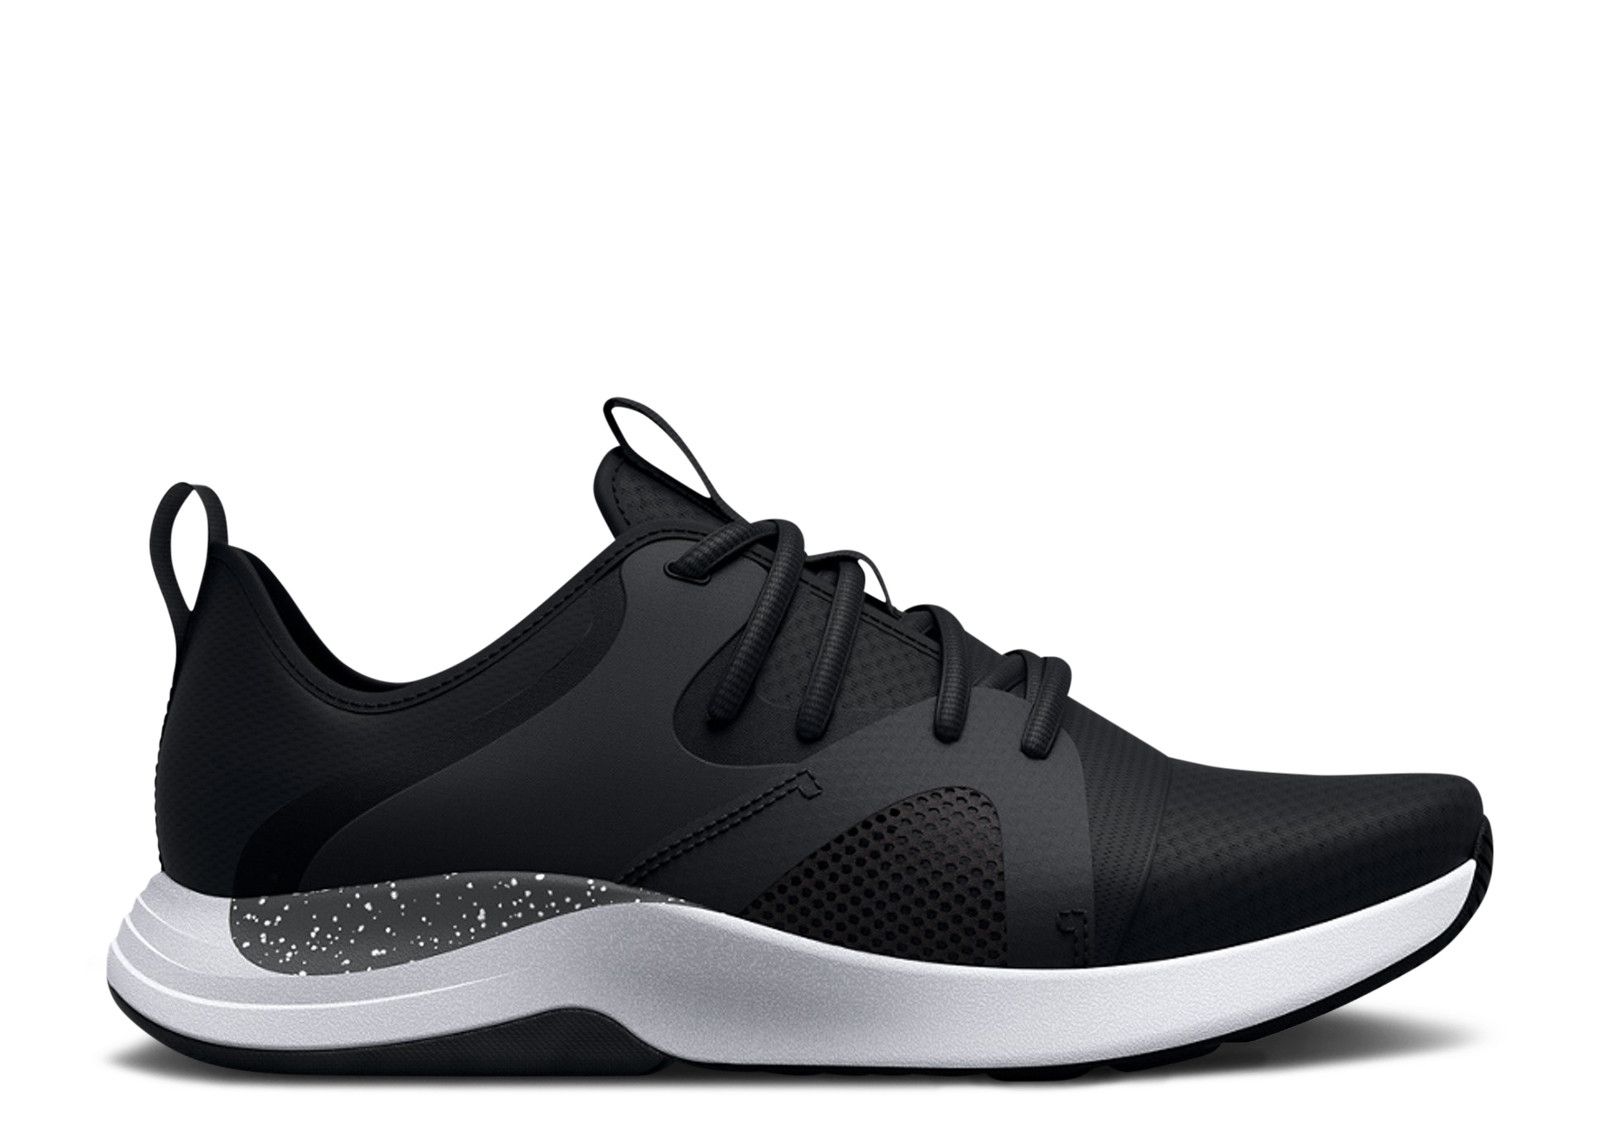 Wmns Charged Breathe Lace TR 'Black Speckled' - Under Armour - 3025058 ...